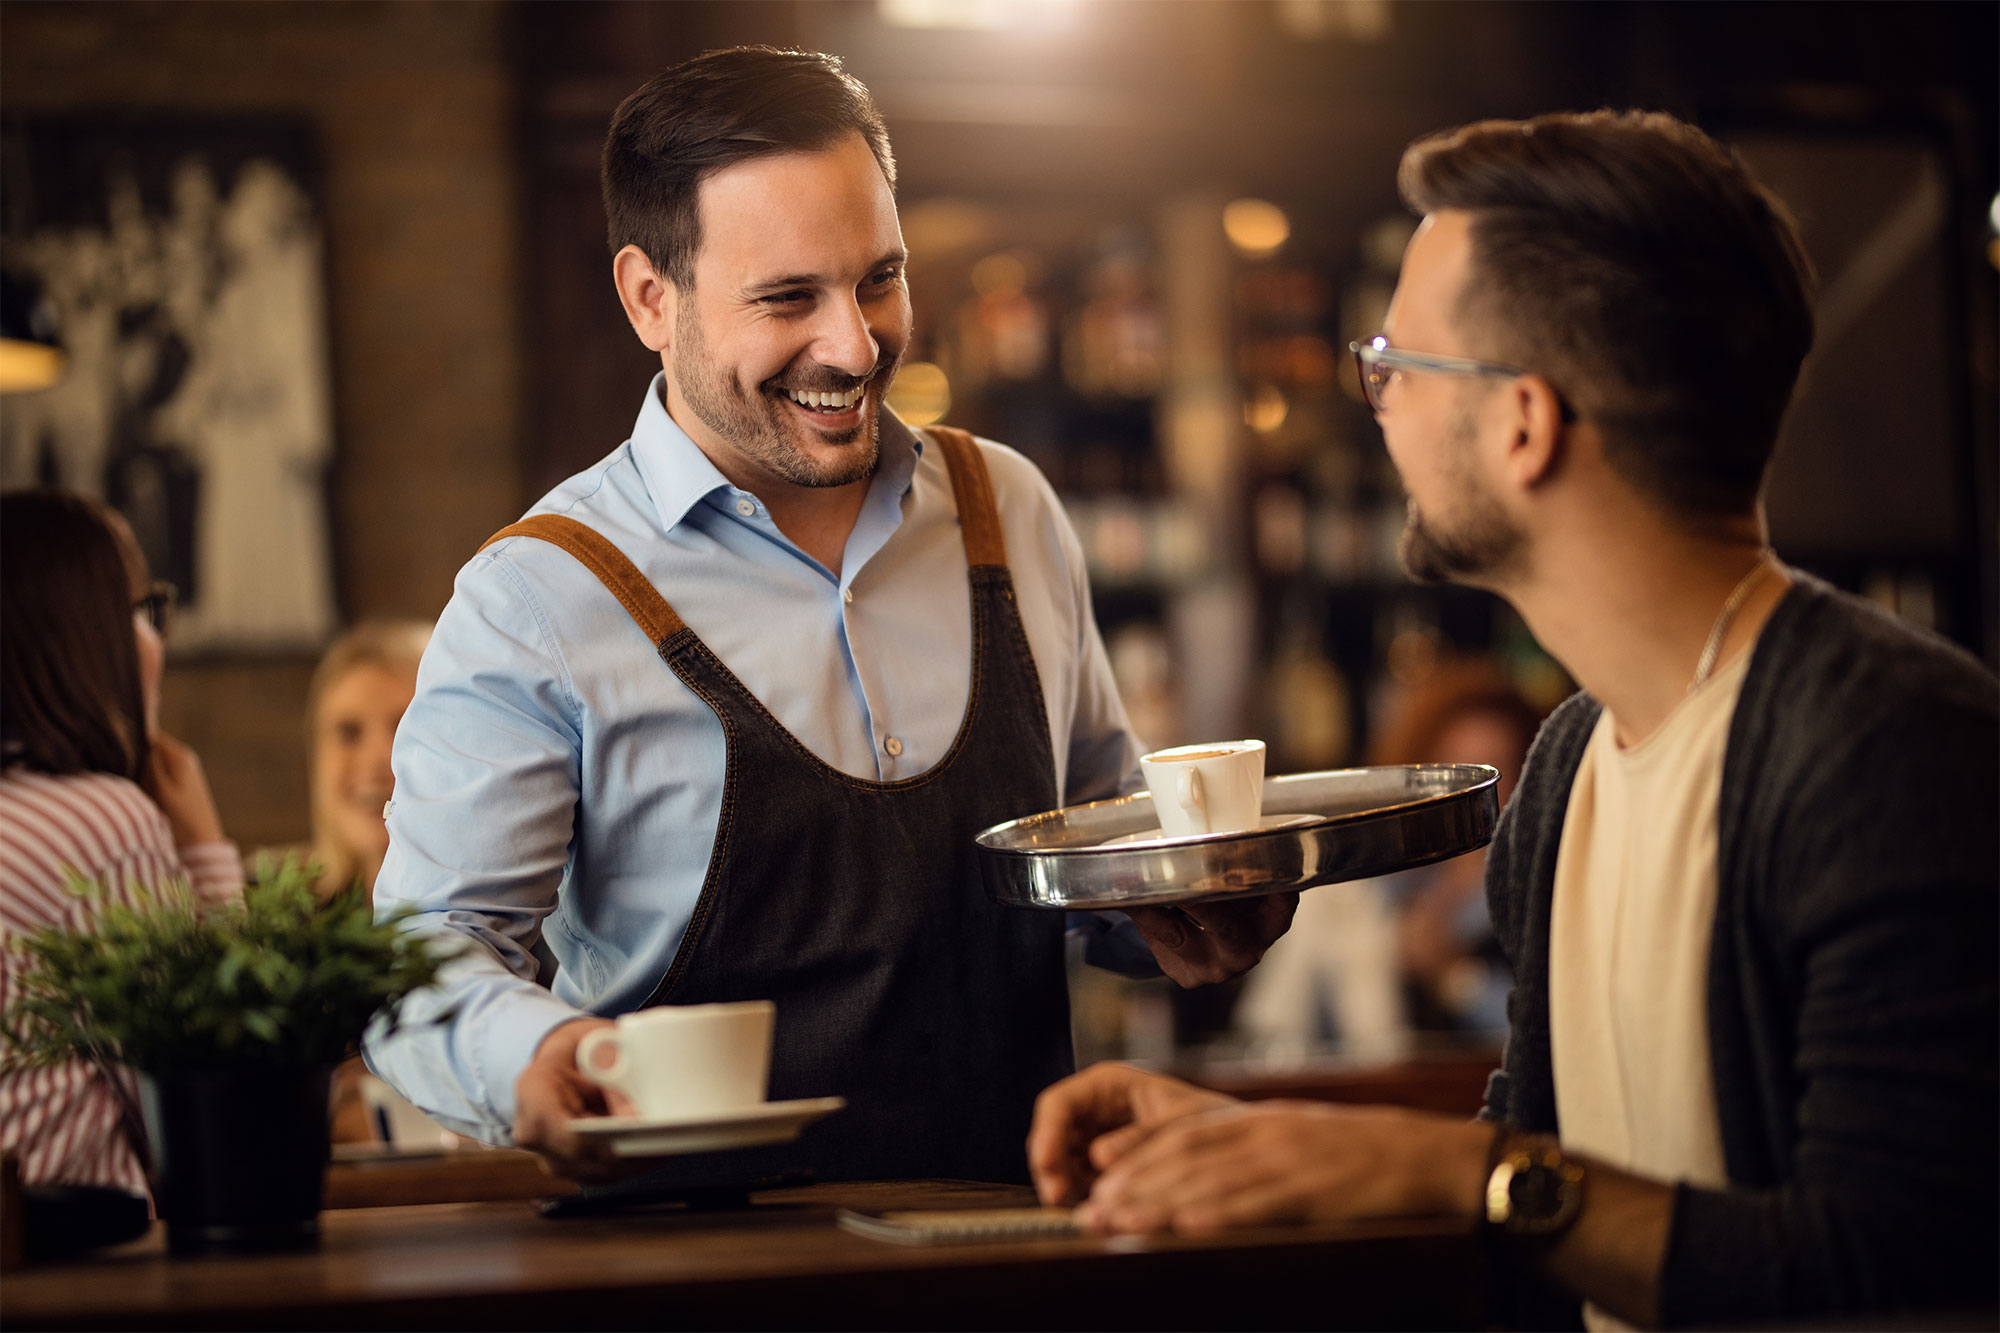 What makes hospitality a rewarding industry